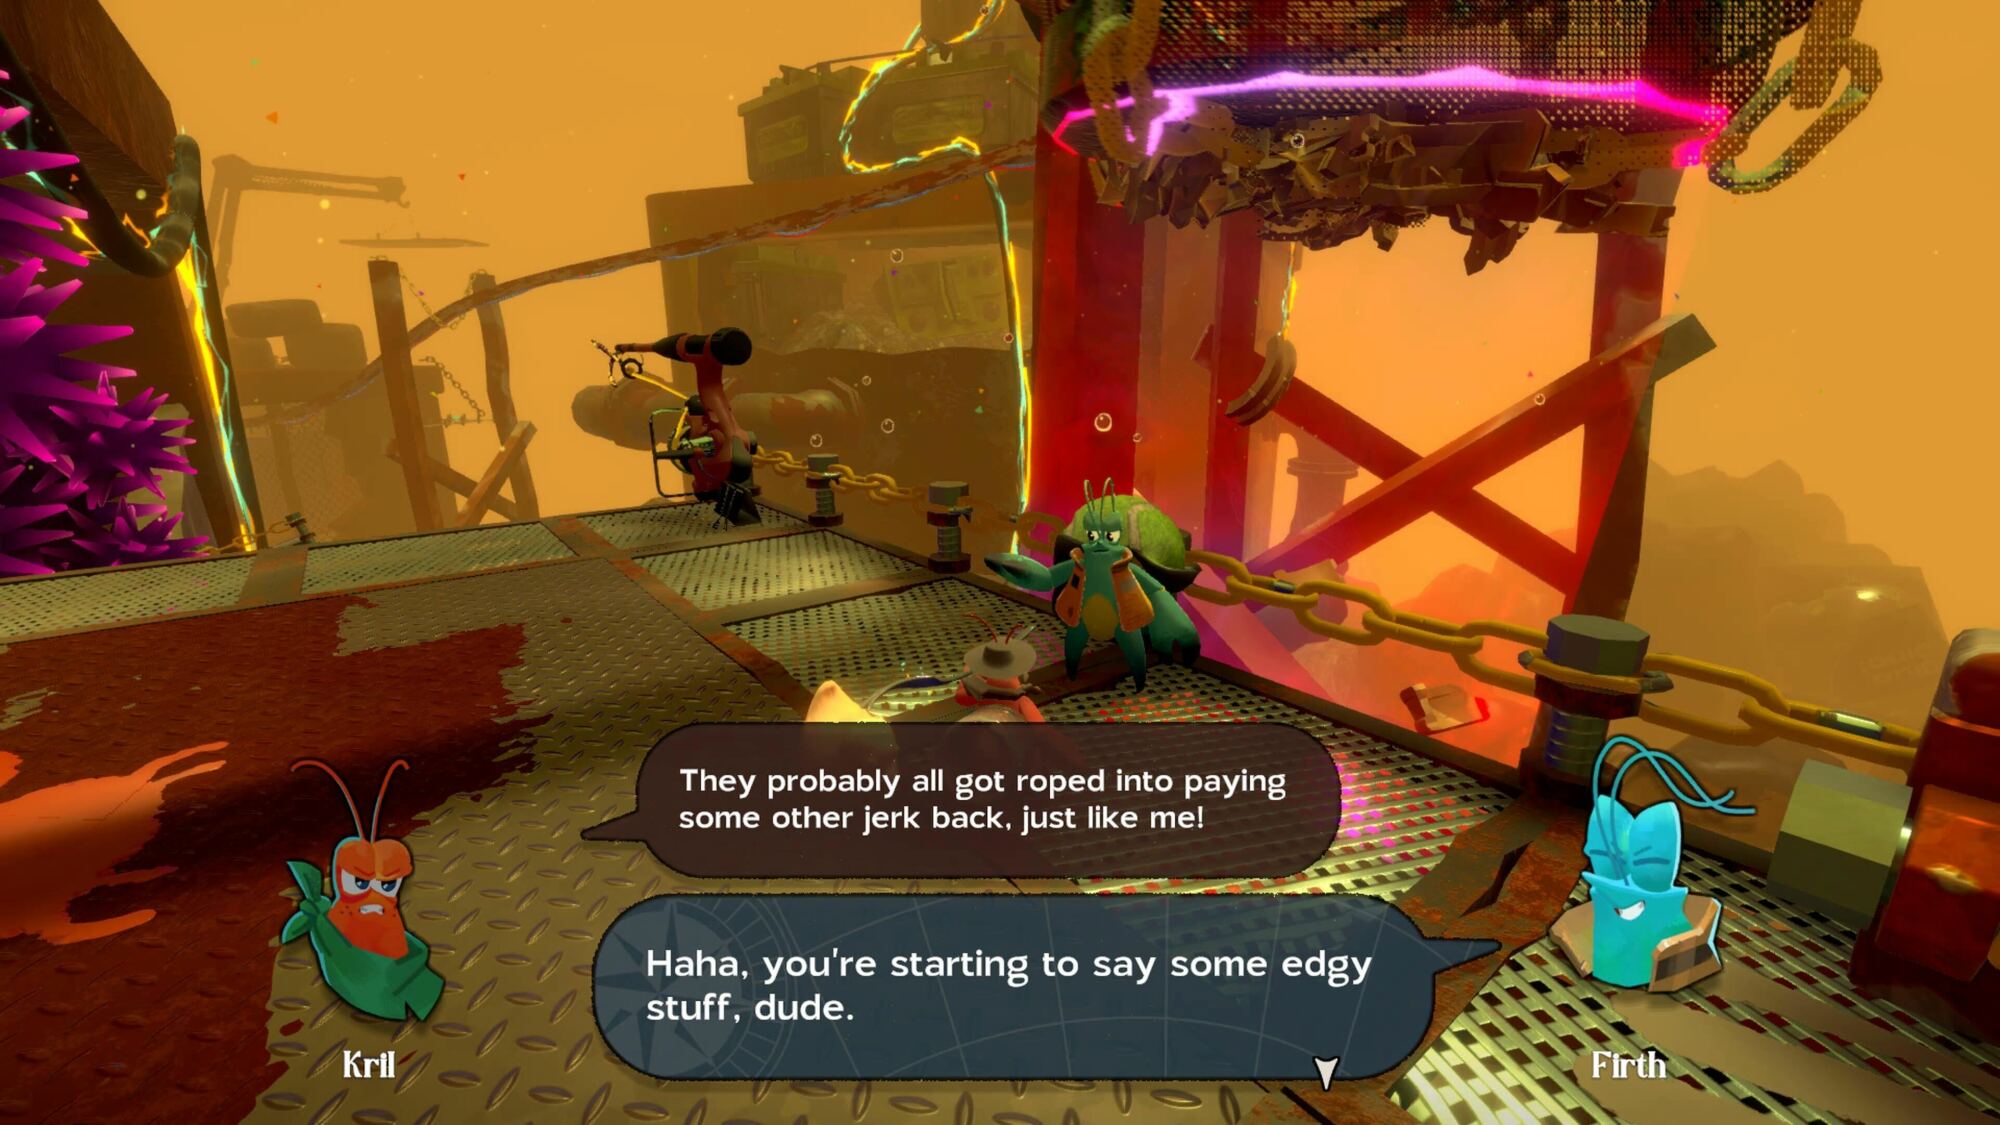 Dialogue in a game between two characters, Kril and Firth, with Firth commenting on Kril's 'edgy' statement against a backdrop of industrial equipment.